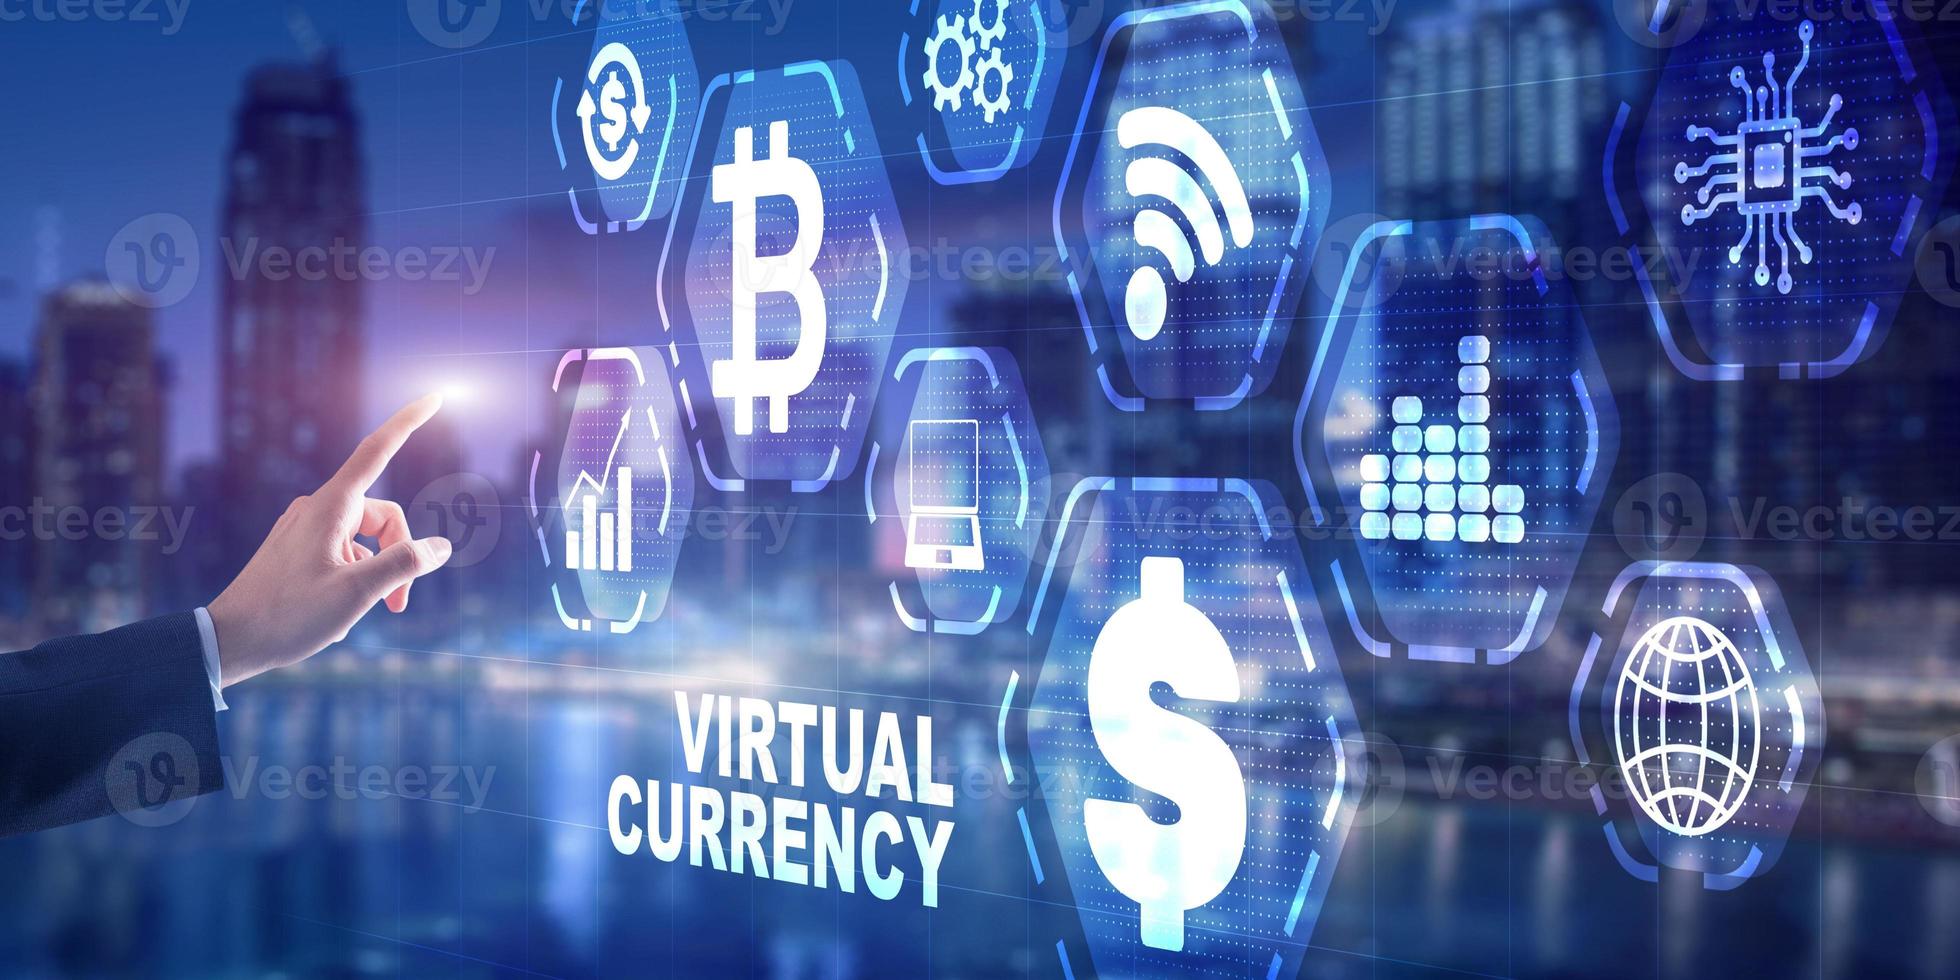 Virtual Currency. Business Finance Concept 2021 photo